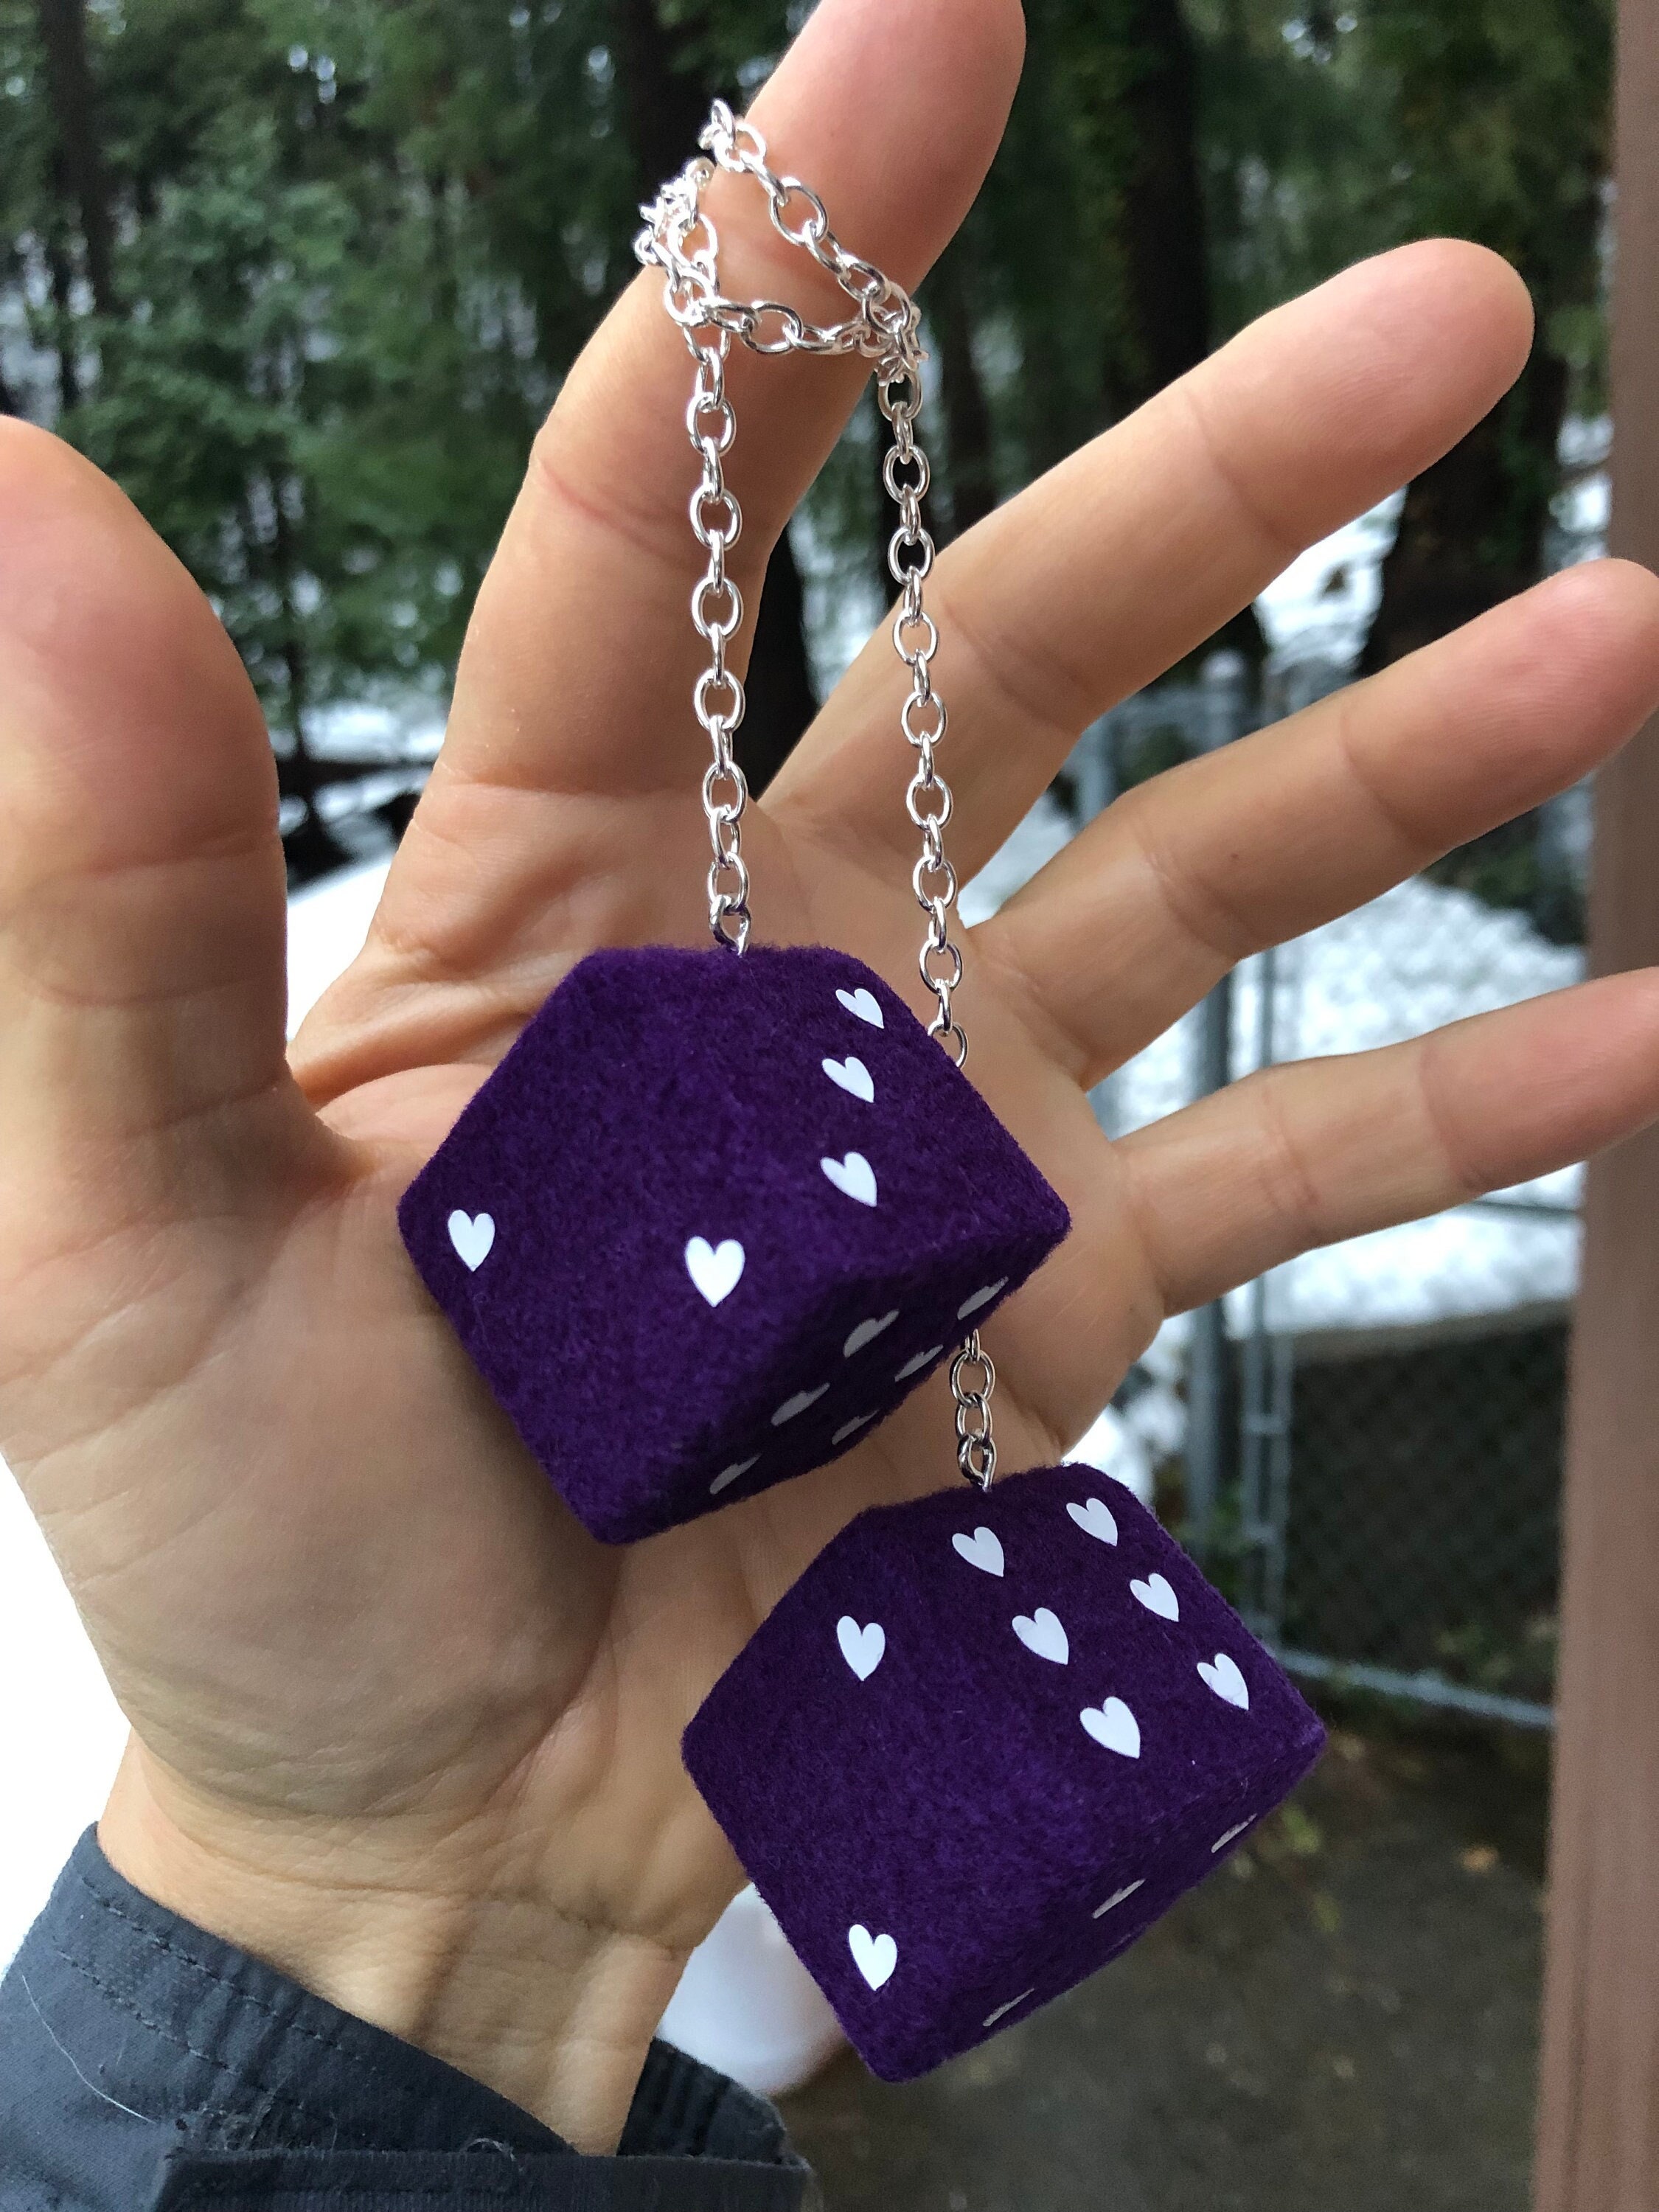 Dark Purple Fuzzy Dice With White Hearts and Chain or Cord / Car  Accessories, Charms, Gift, Novelty, Mirror Danglers, Car Dice, Car Charm 